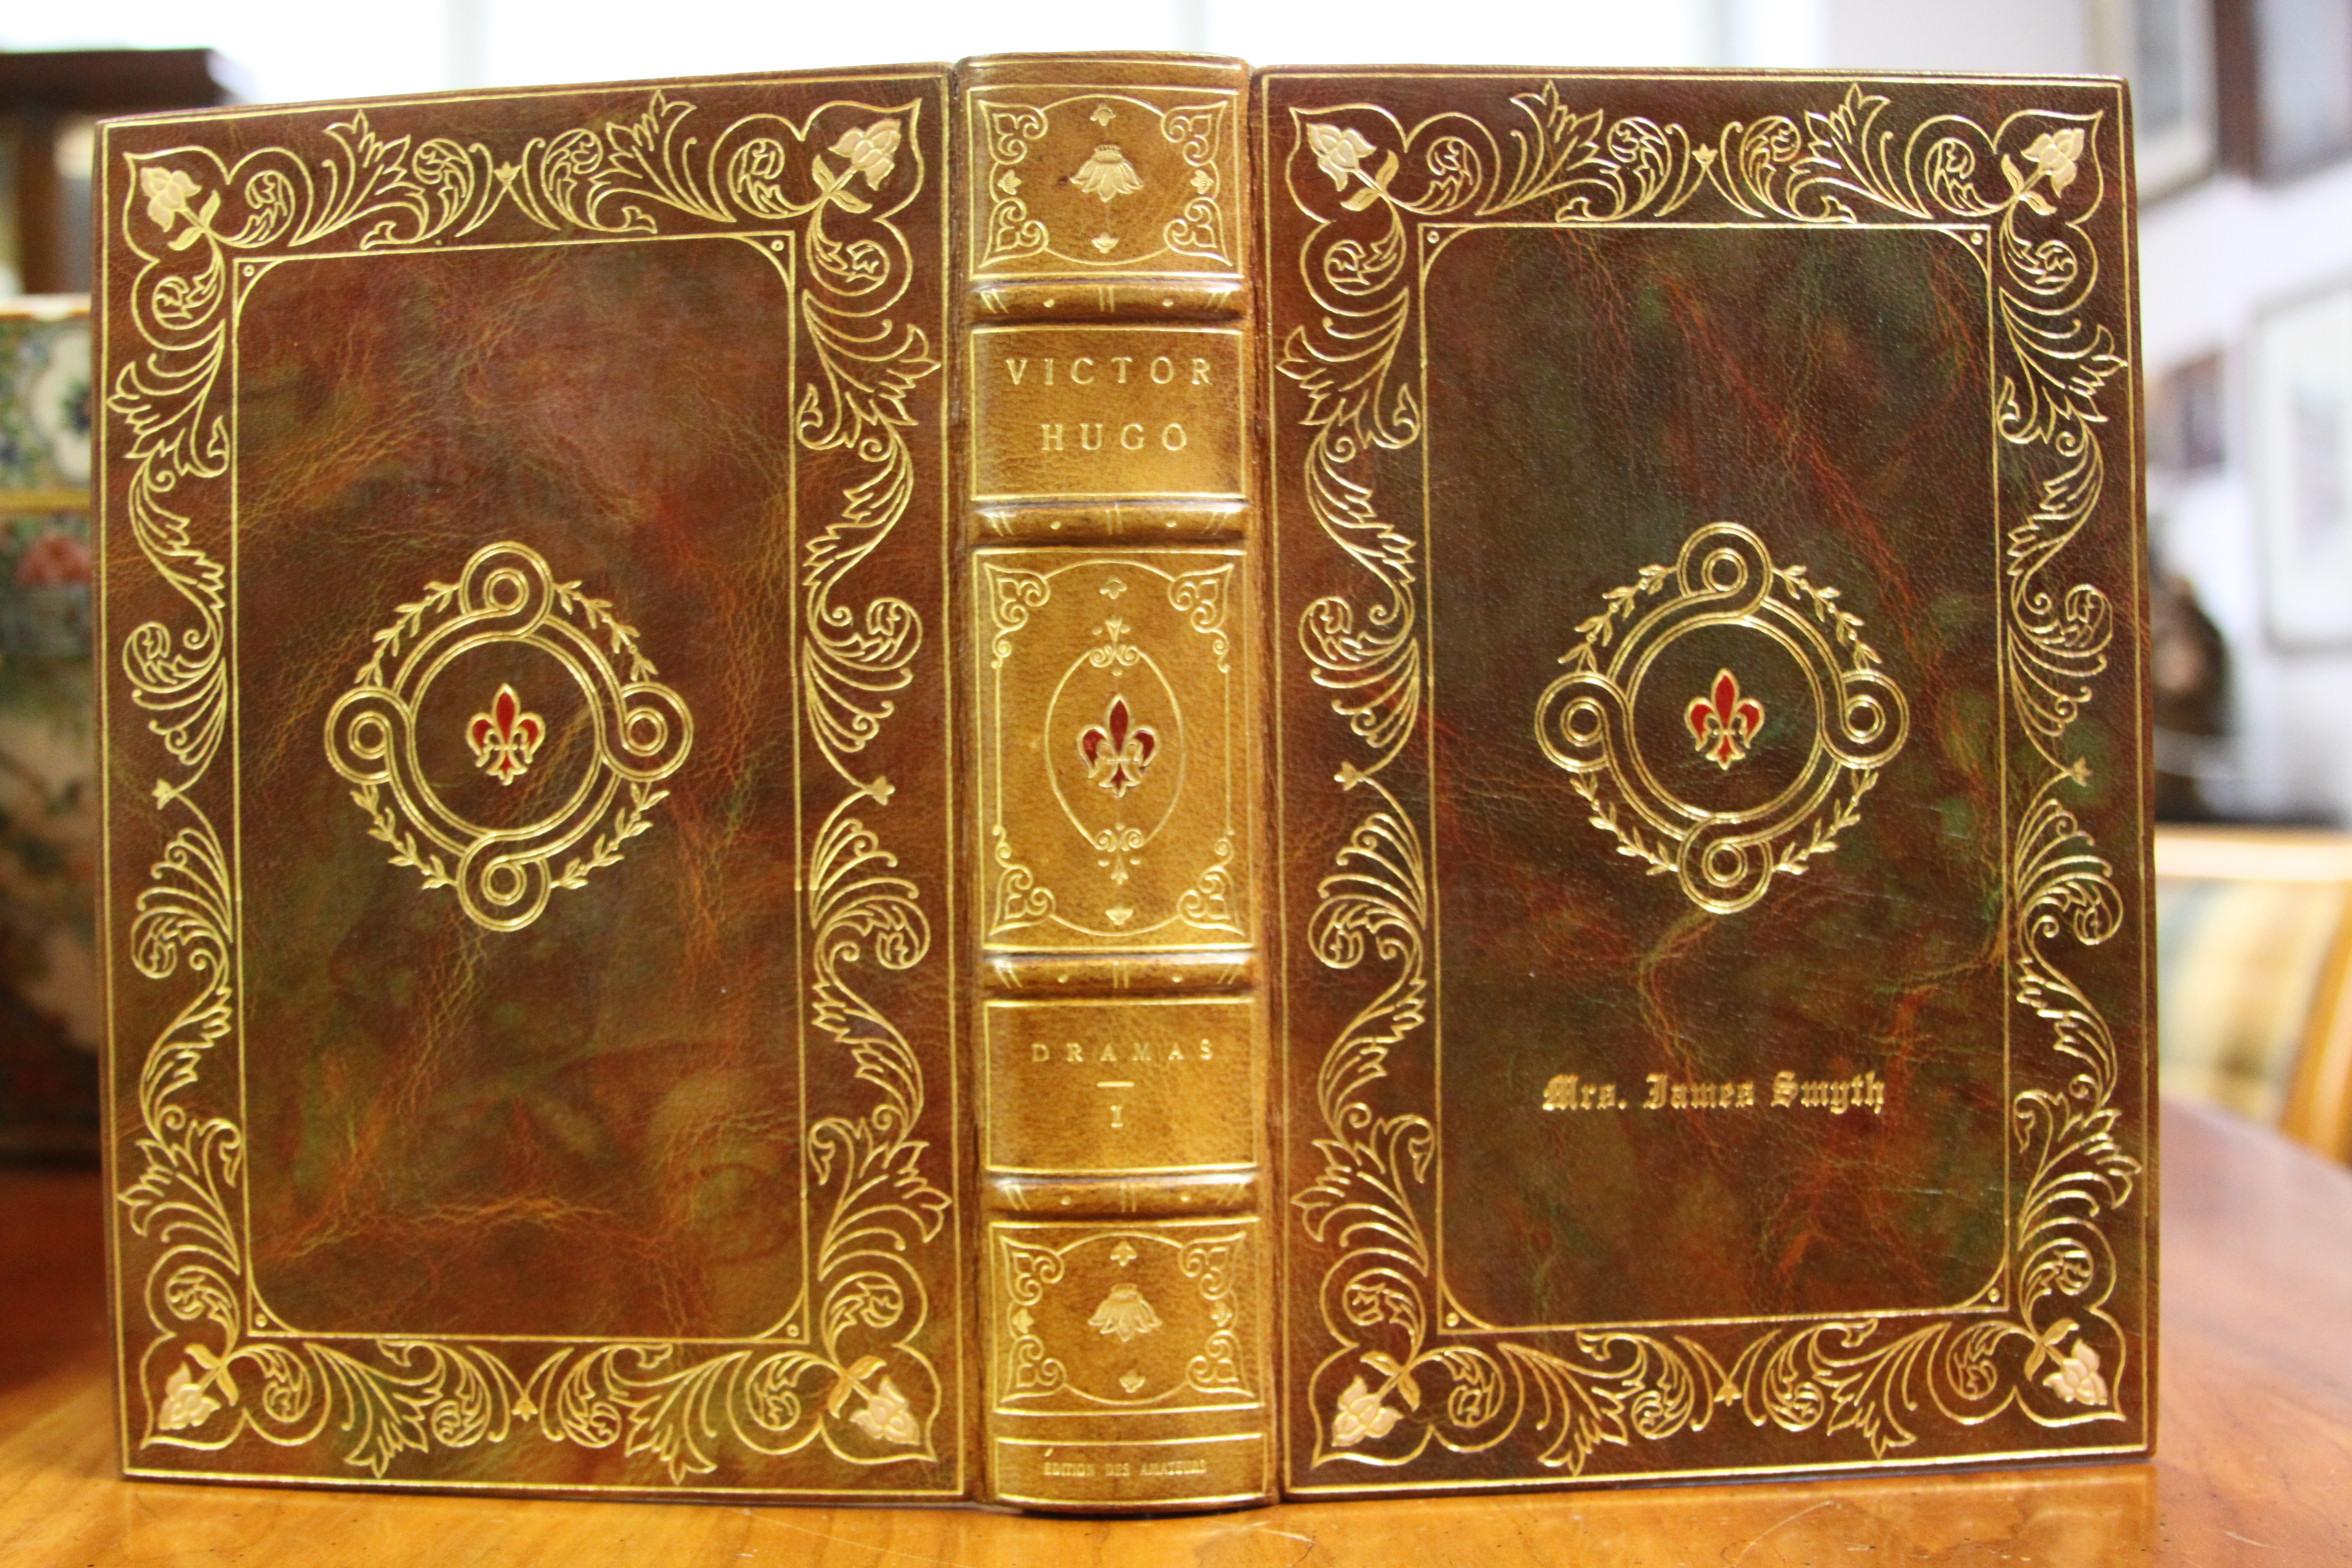 Thirty volumes. The Writings of Victor Hugo. Edition Des Amateurs. Published: Boston, Estes and Lauriat, n.d, circa, 1900s. The edition is limited to 25 copies which this is number 16. Fully illustrated to set, frontispiece plates are in two states